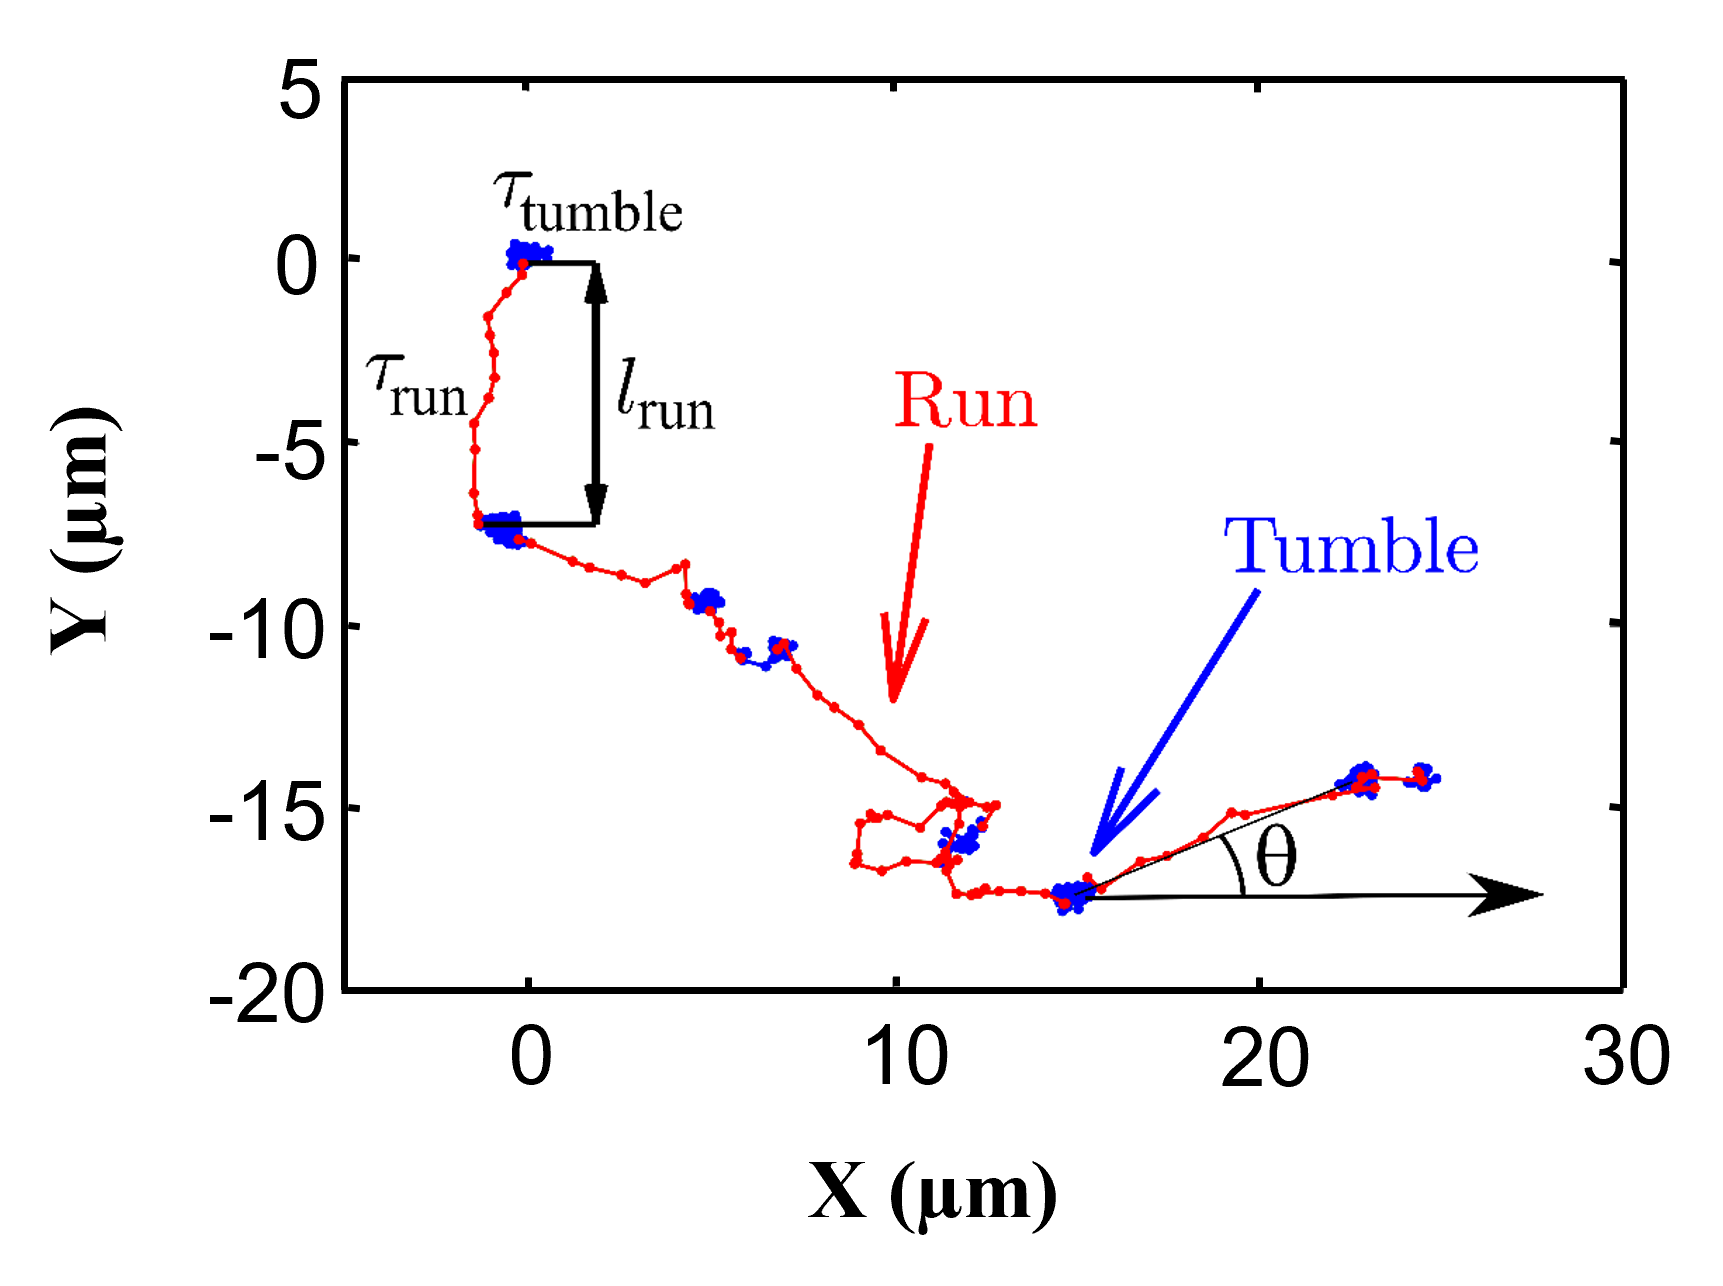 Figure 10. Illustration of run-and-tumble motion of a Synechocystis cell extracted from the experi- mental trajectory of a single cell. During run the cell moves quickly from one point to another, while during tumble it remains constrained in a given area and tends to change directions. Synechocystis